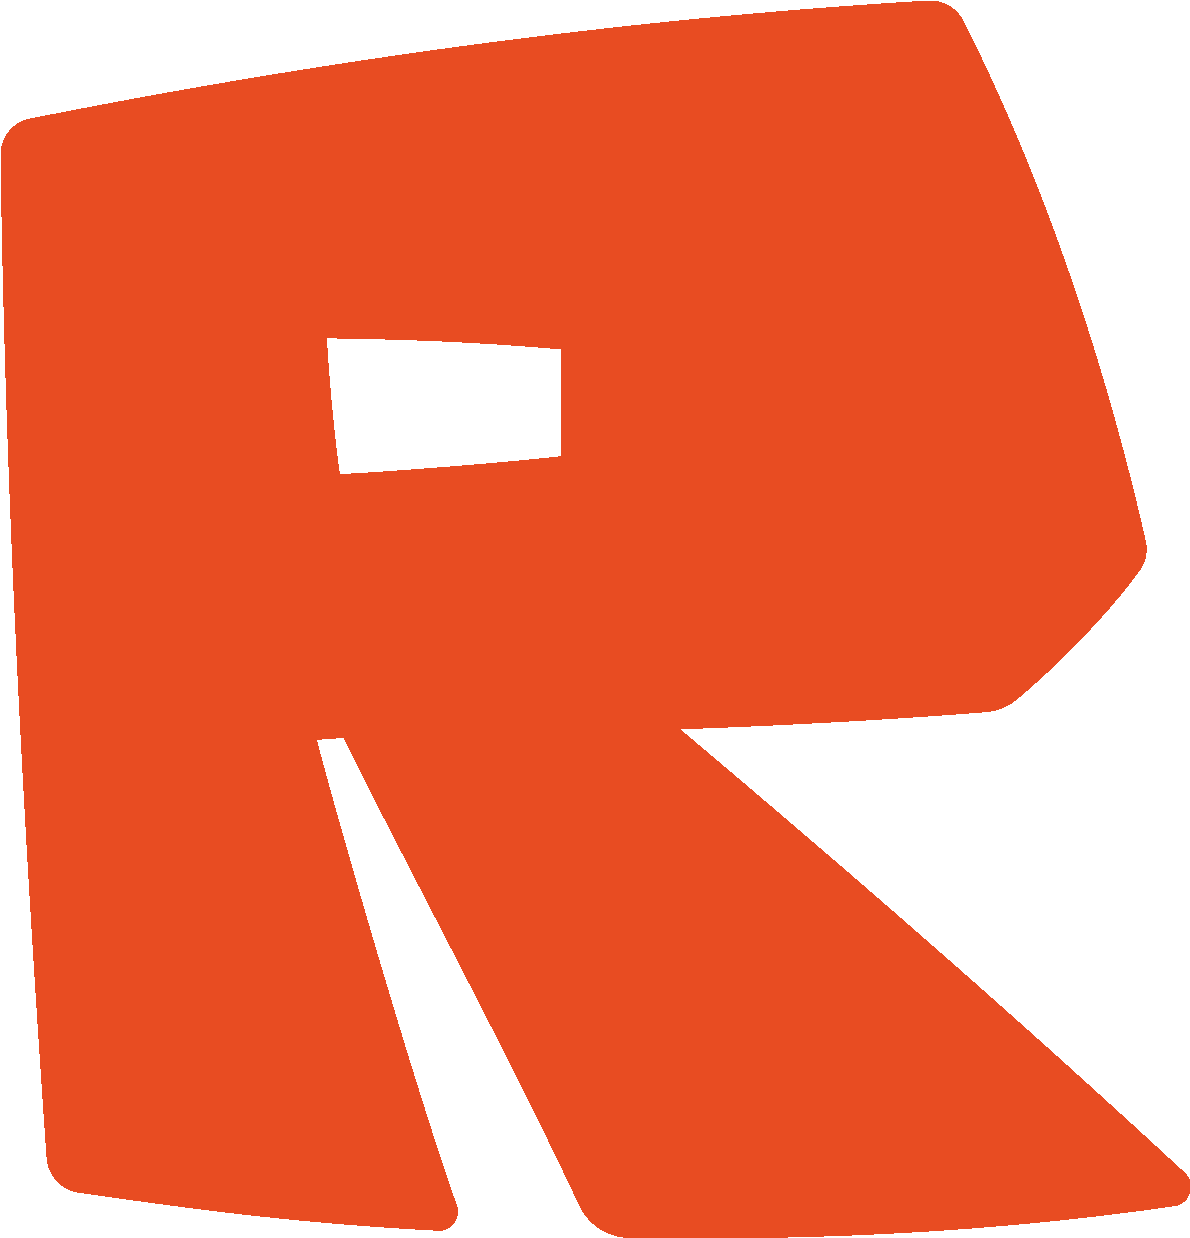 Download Roblox Wikia Favicon Roblox Wikia Png Image With No Background Pngkey Com - download free png image happy winkpng roblox wikia